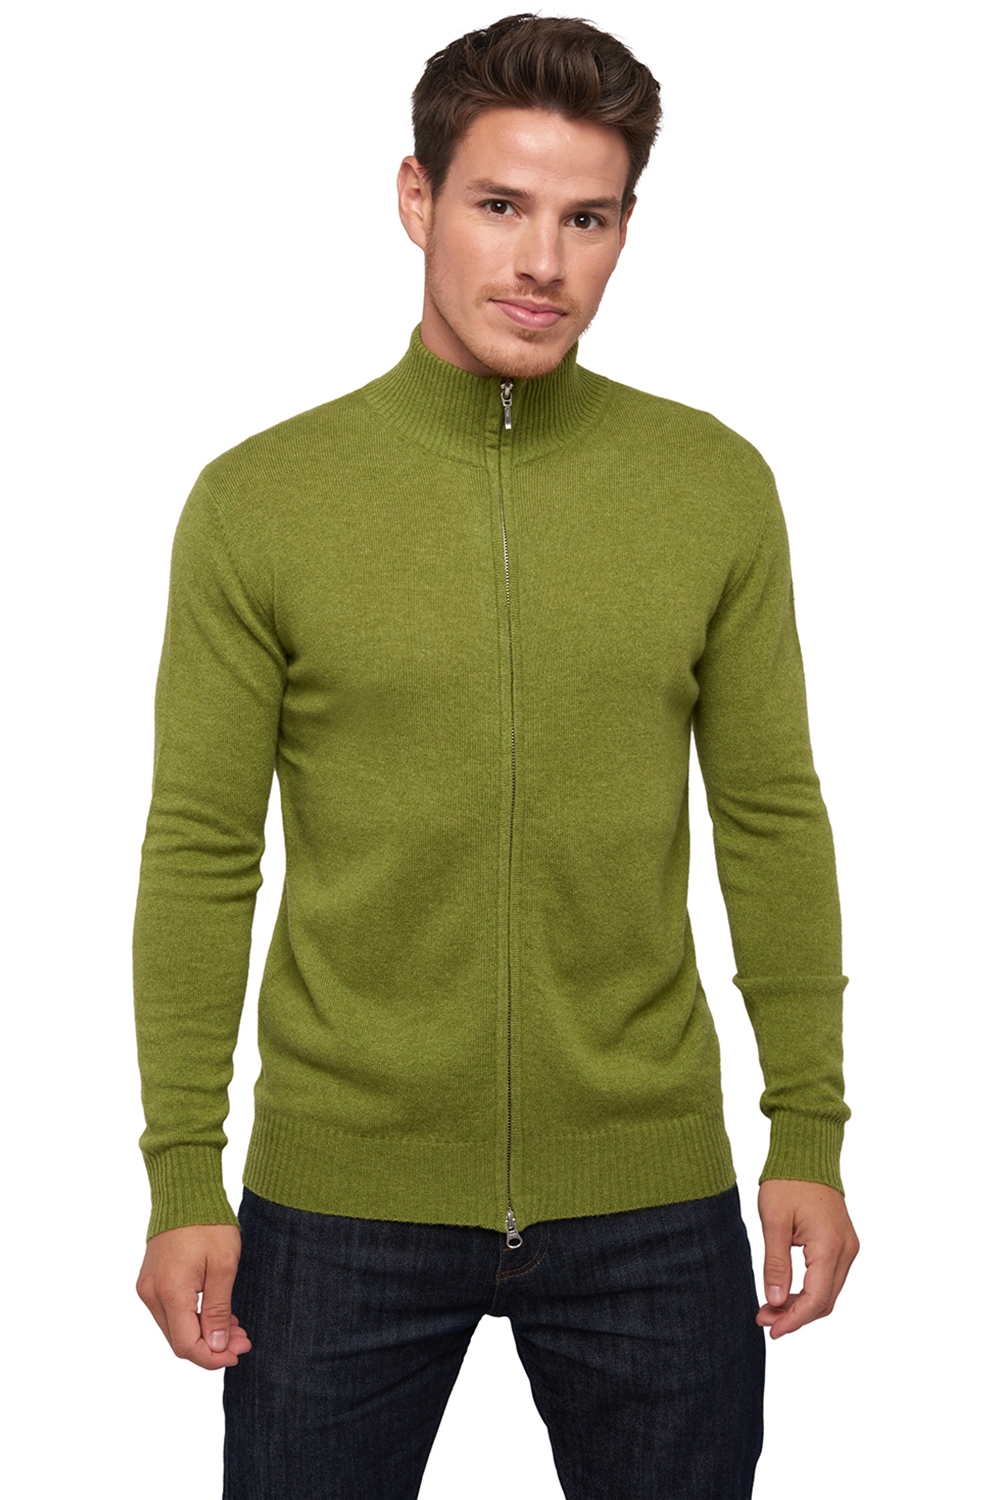 Cashmere men basic sweaters at low prices thobias first bamboo l